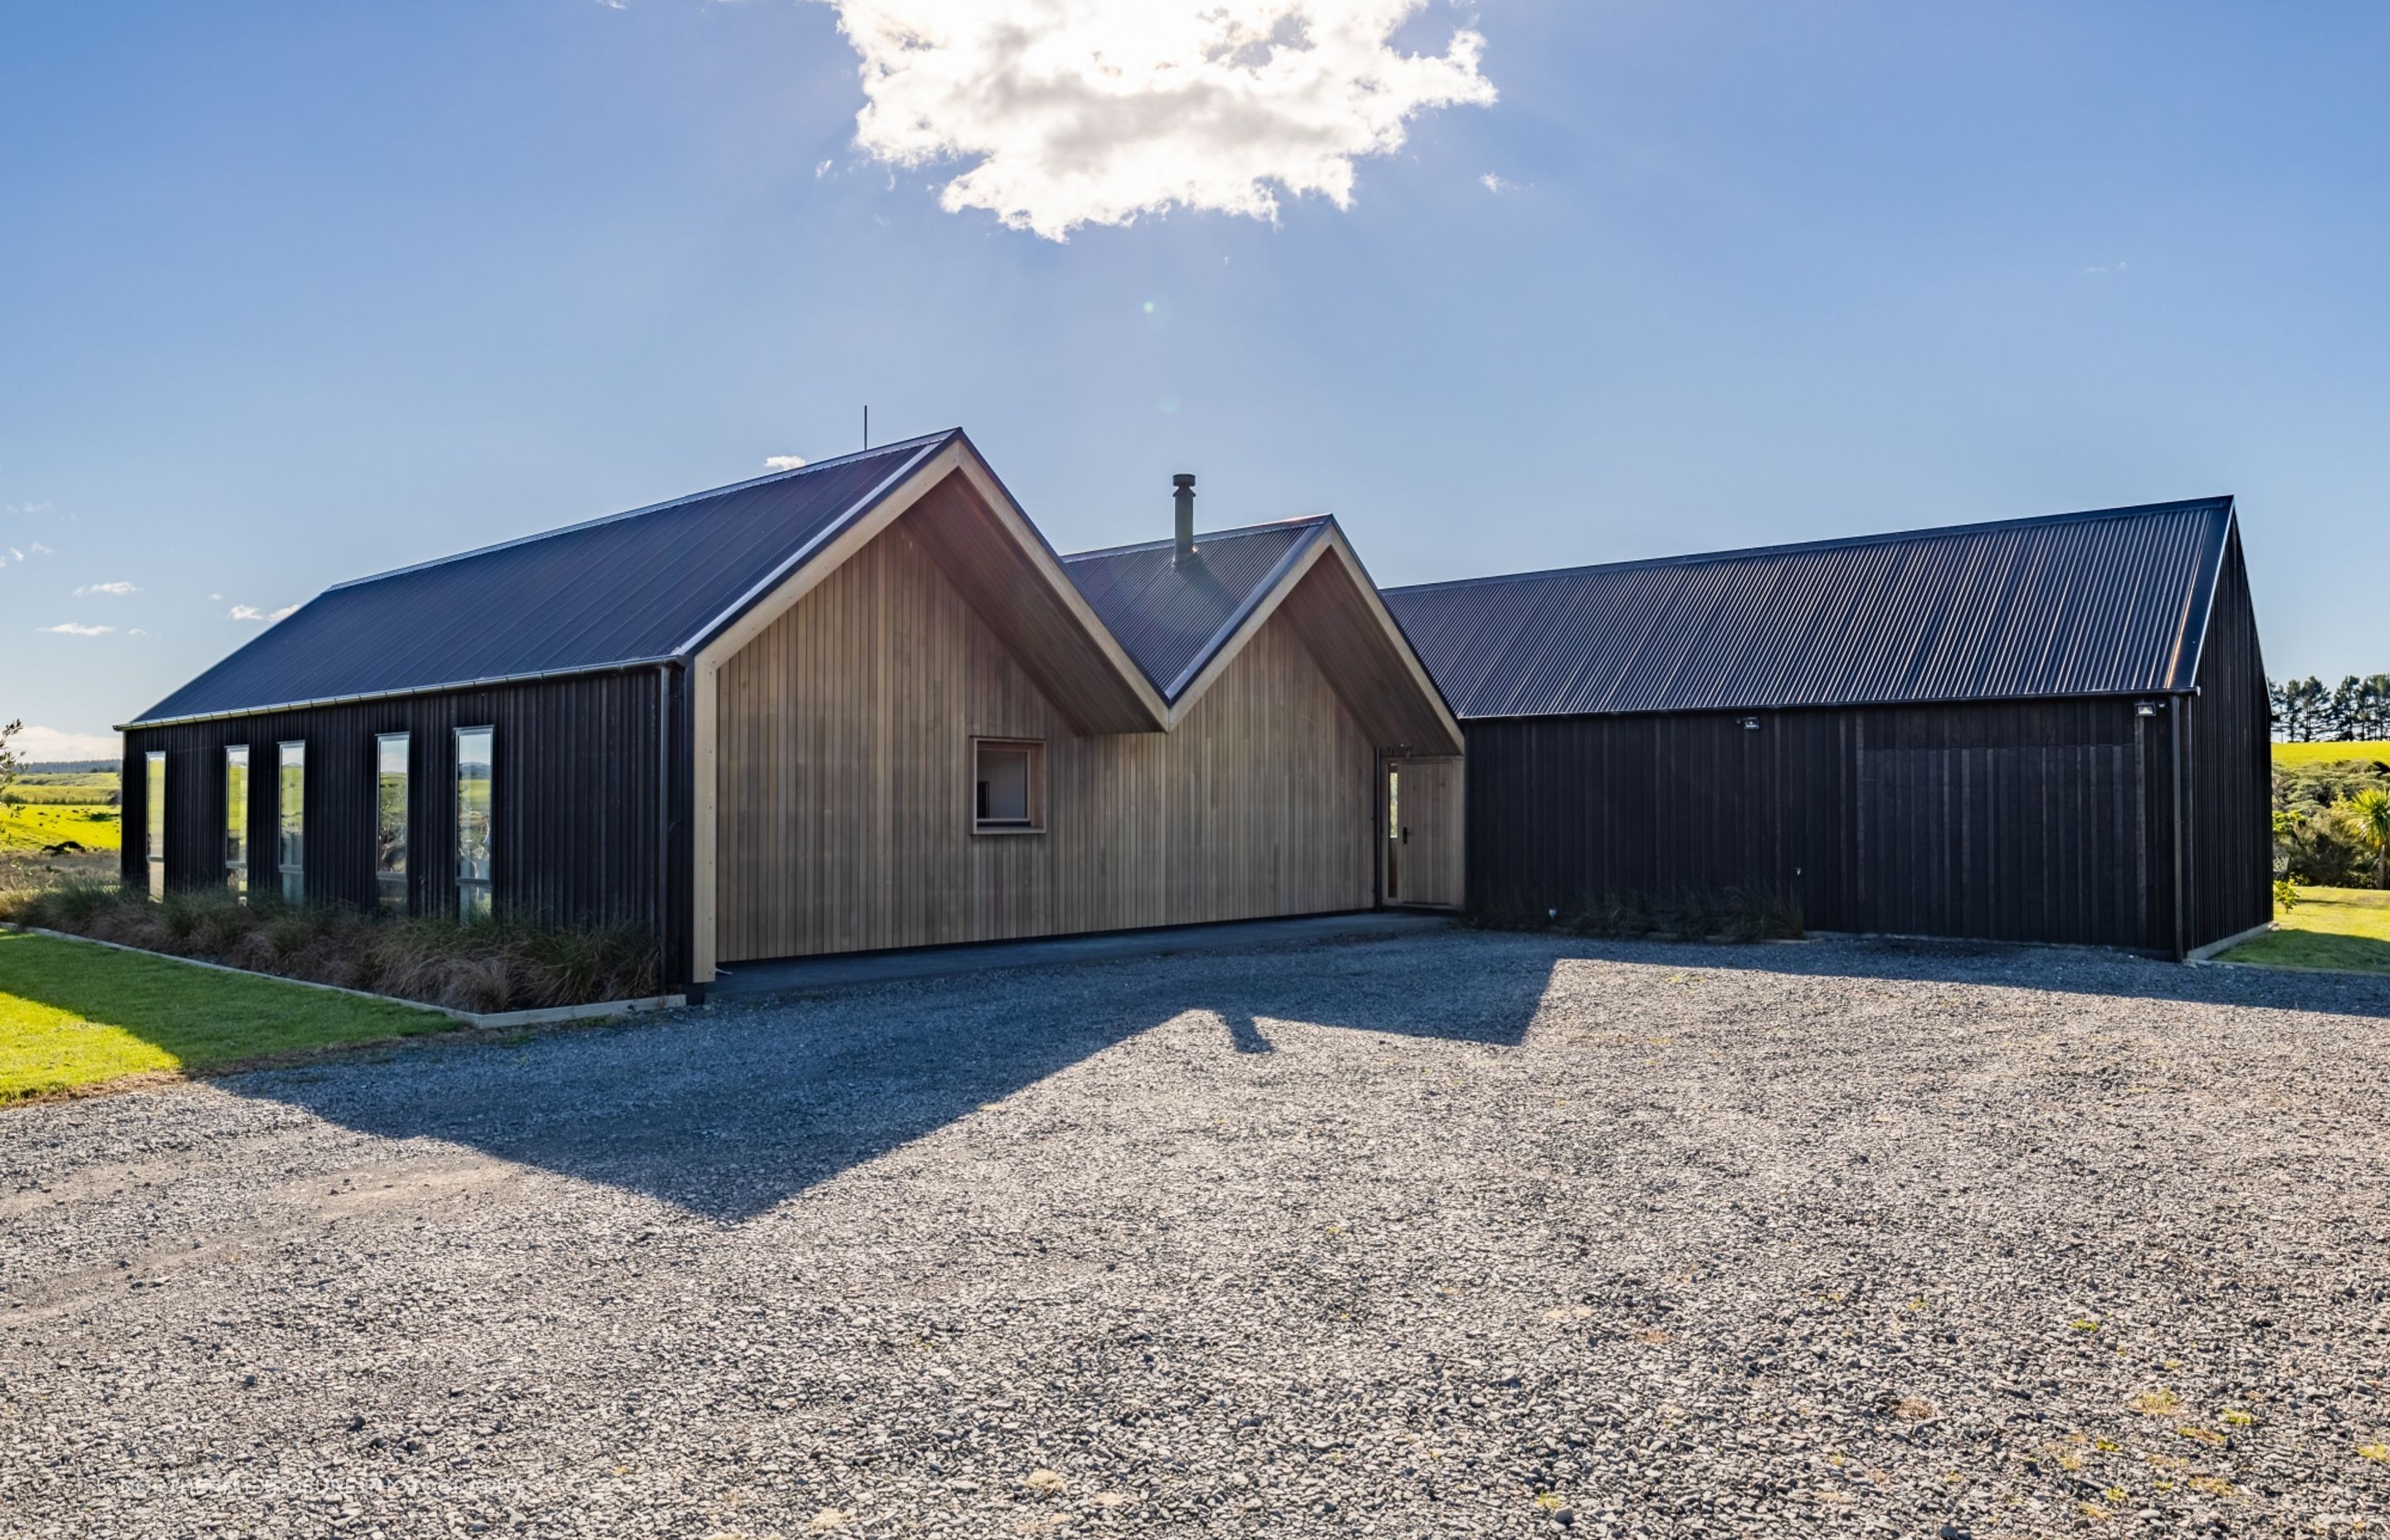 The clients had a specific desire for a repeating gable form and for a building that, "on approach, is not obviously a dwelling, perhaps appearing to be a farm building."